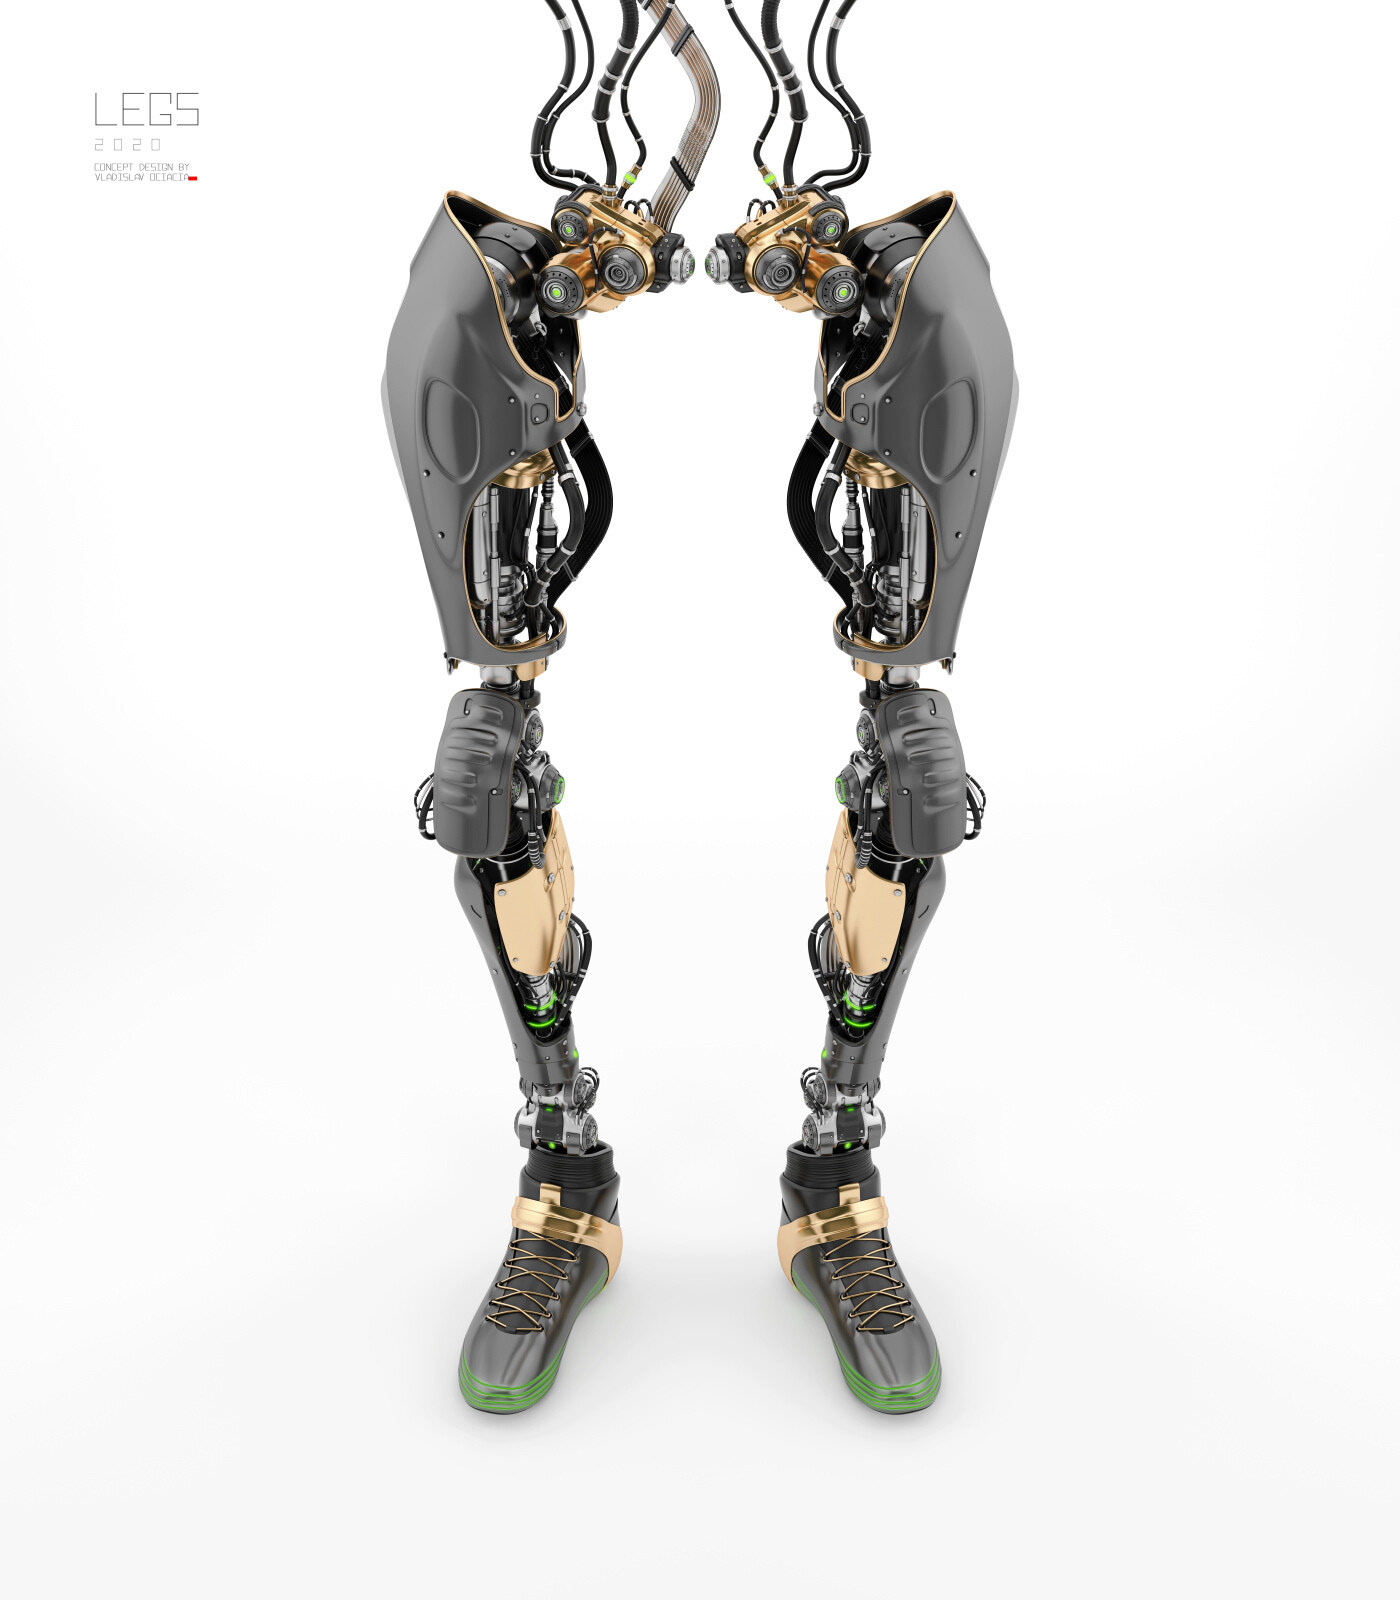 artificial connected Cyborg future legs limbs replacement robotic sci-fi Technology